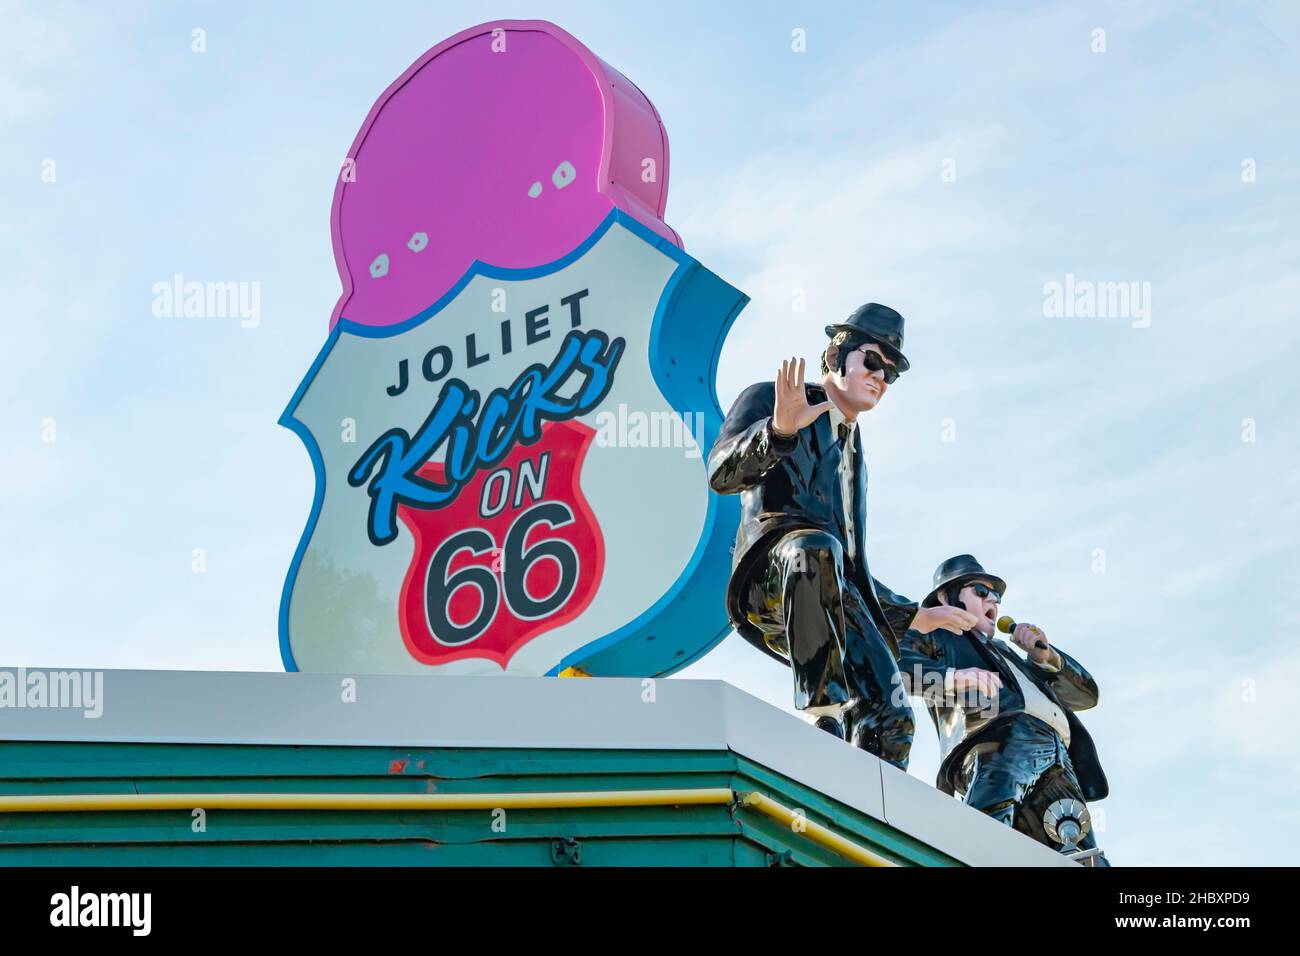 Jake and blues brothers models on top of ice cream parlour  on Route 66 in Joliet Illinois where the blues brothers was partly filmed in Joliet prison Stock Photo